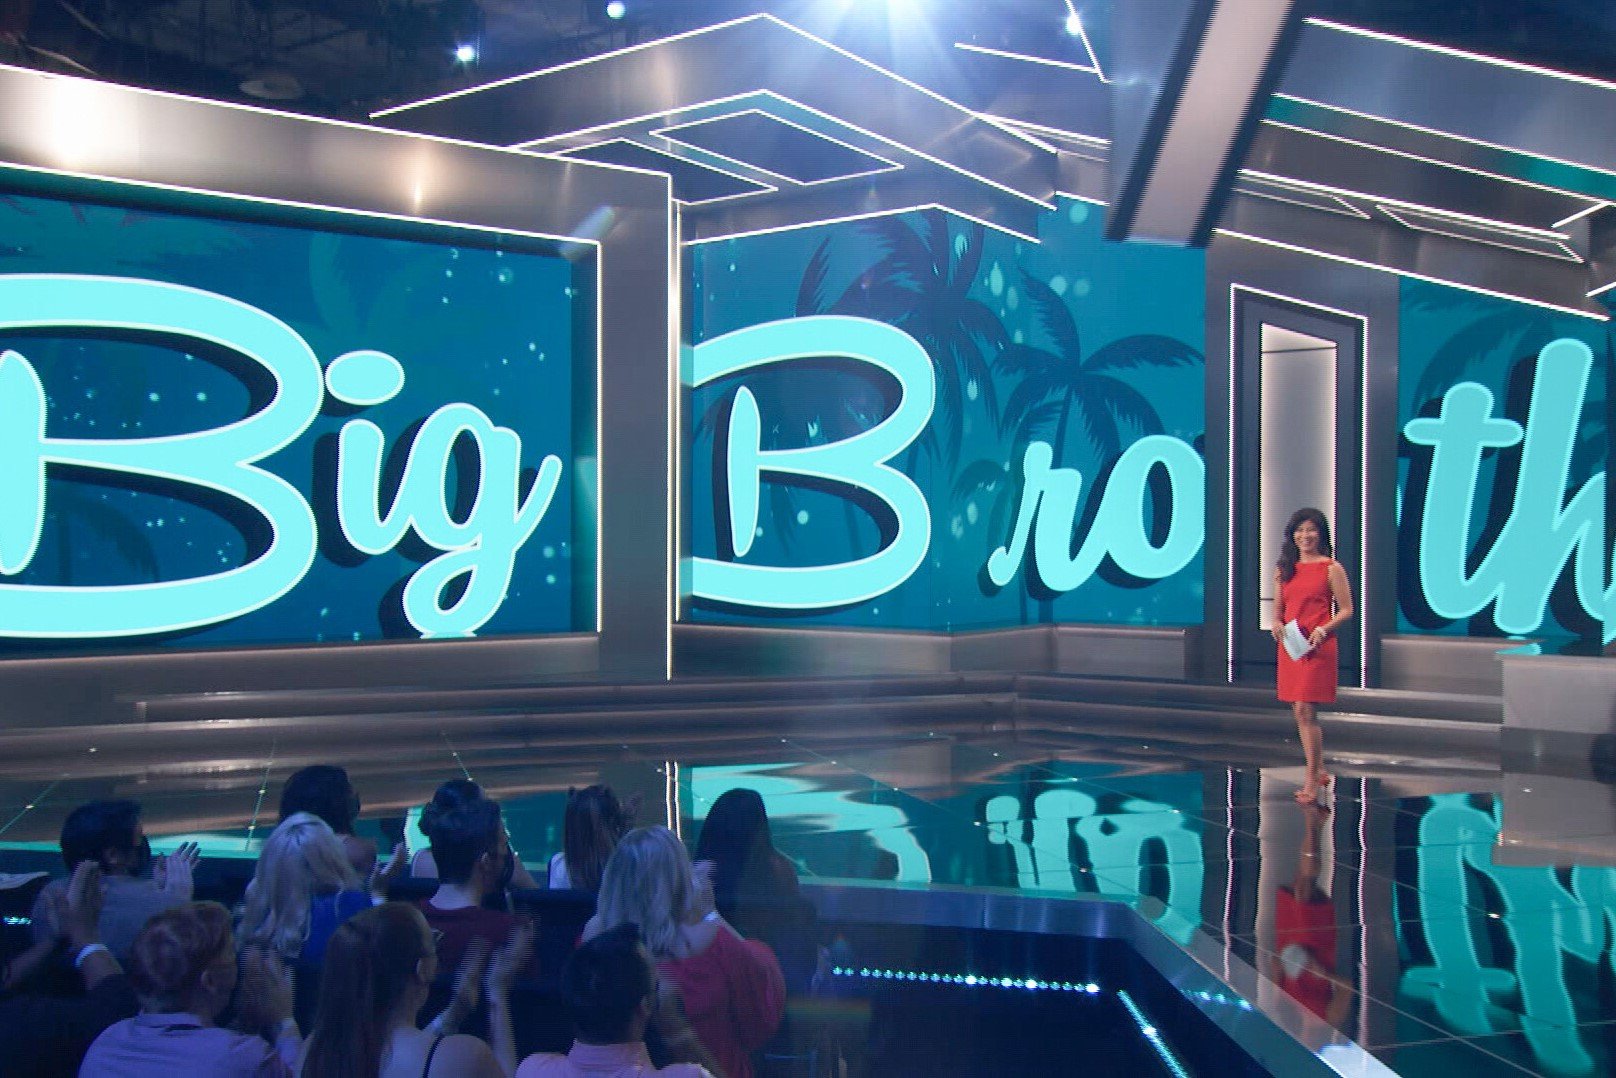 Julie Chen Moonves stands on the 'Big Brother' stage in a red dress. Casting for 'Big Brother' Season 25 begins on Monday, Feb. 13.